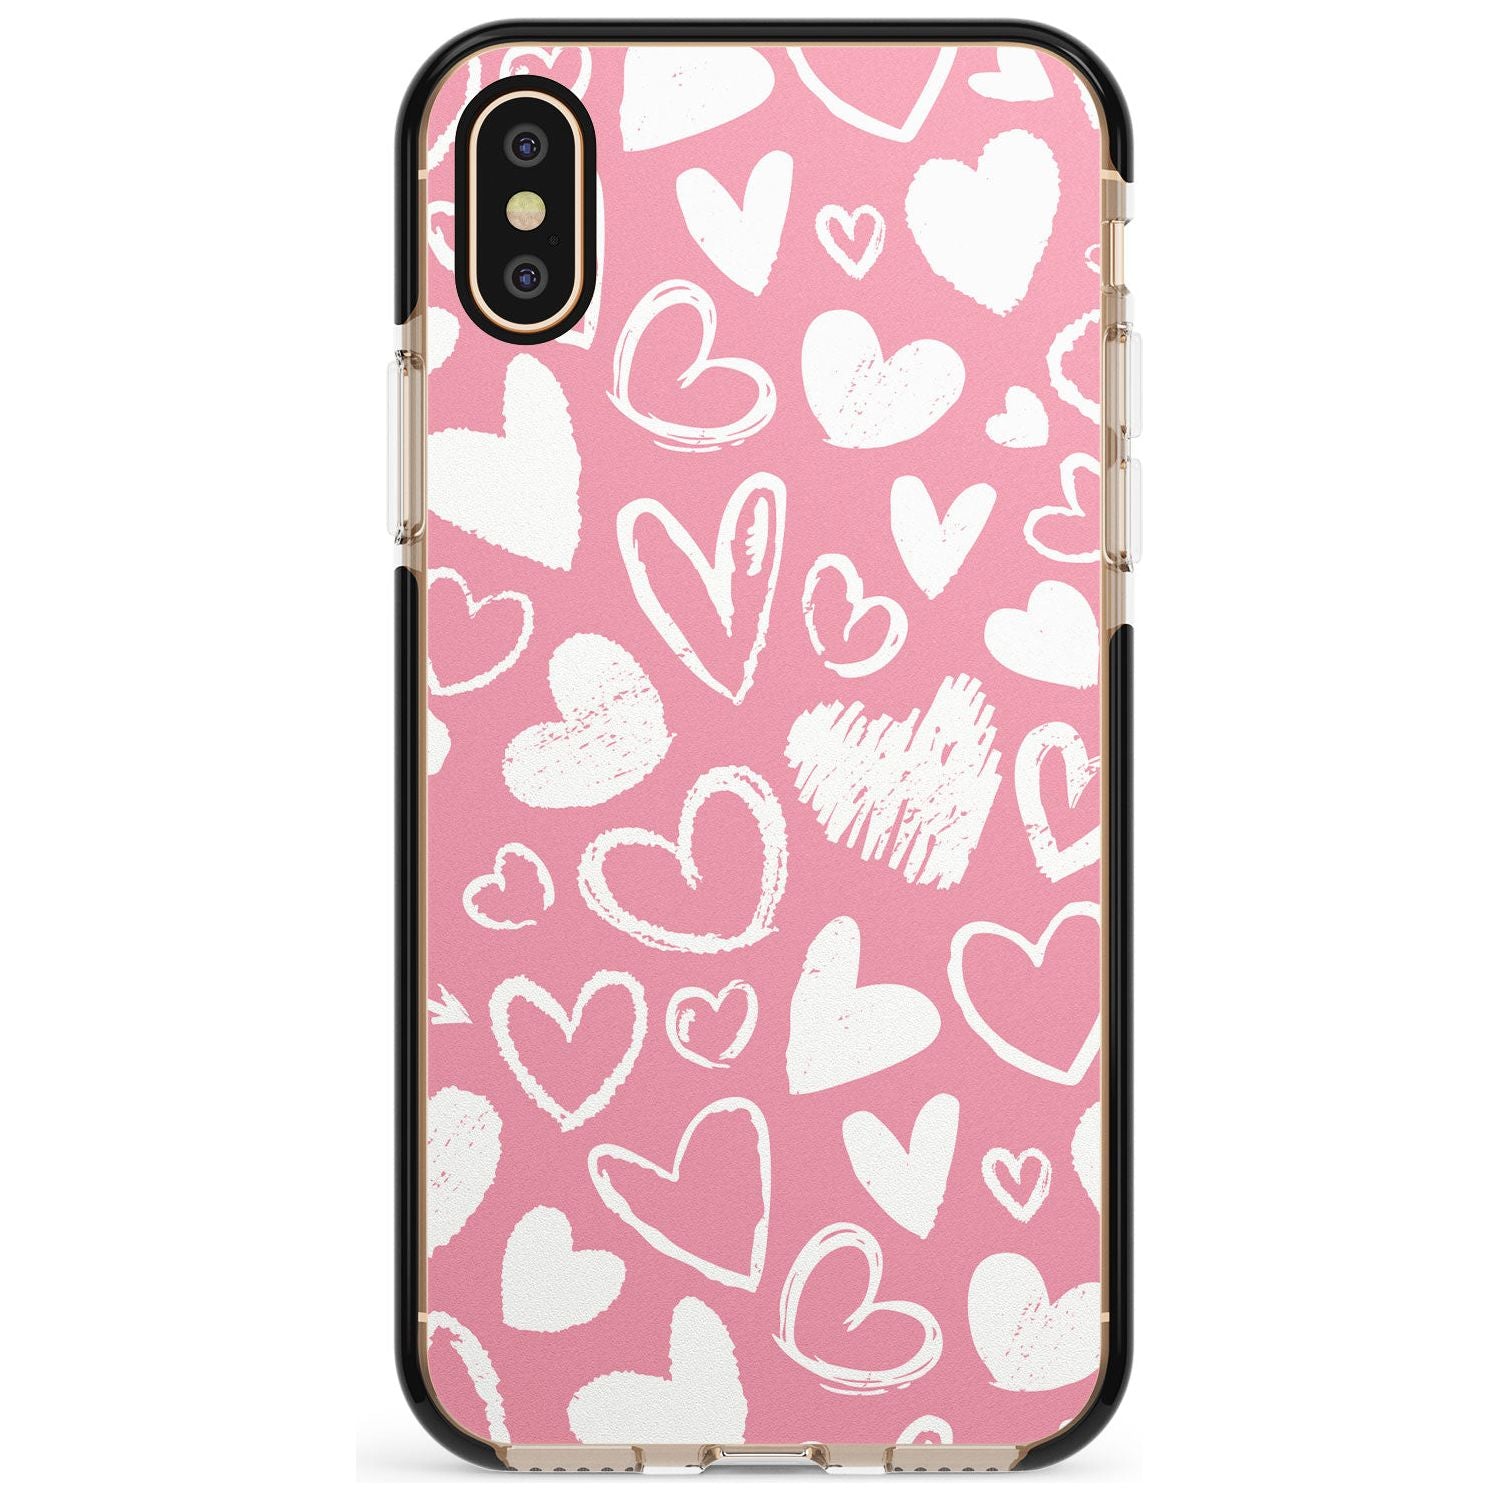 Chalk Hearts Black Impact Phone Case for iPhone X XS Max XR